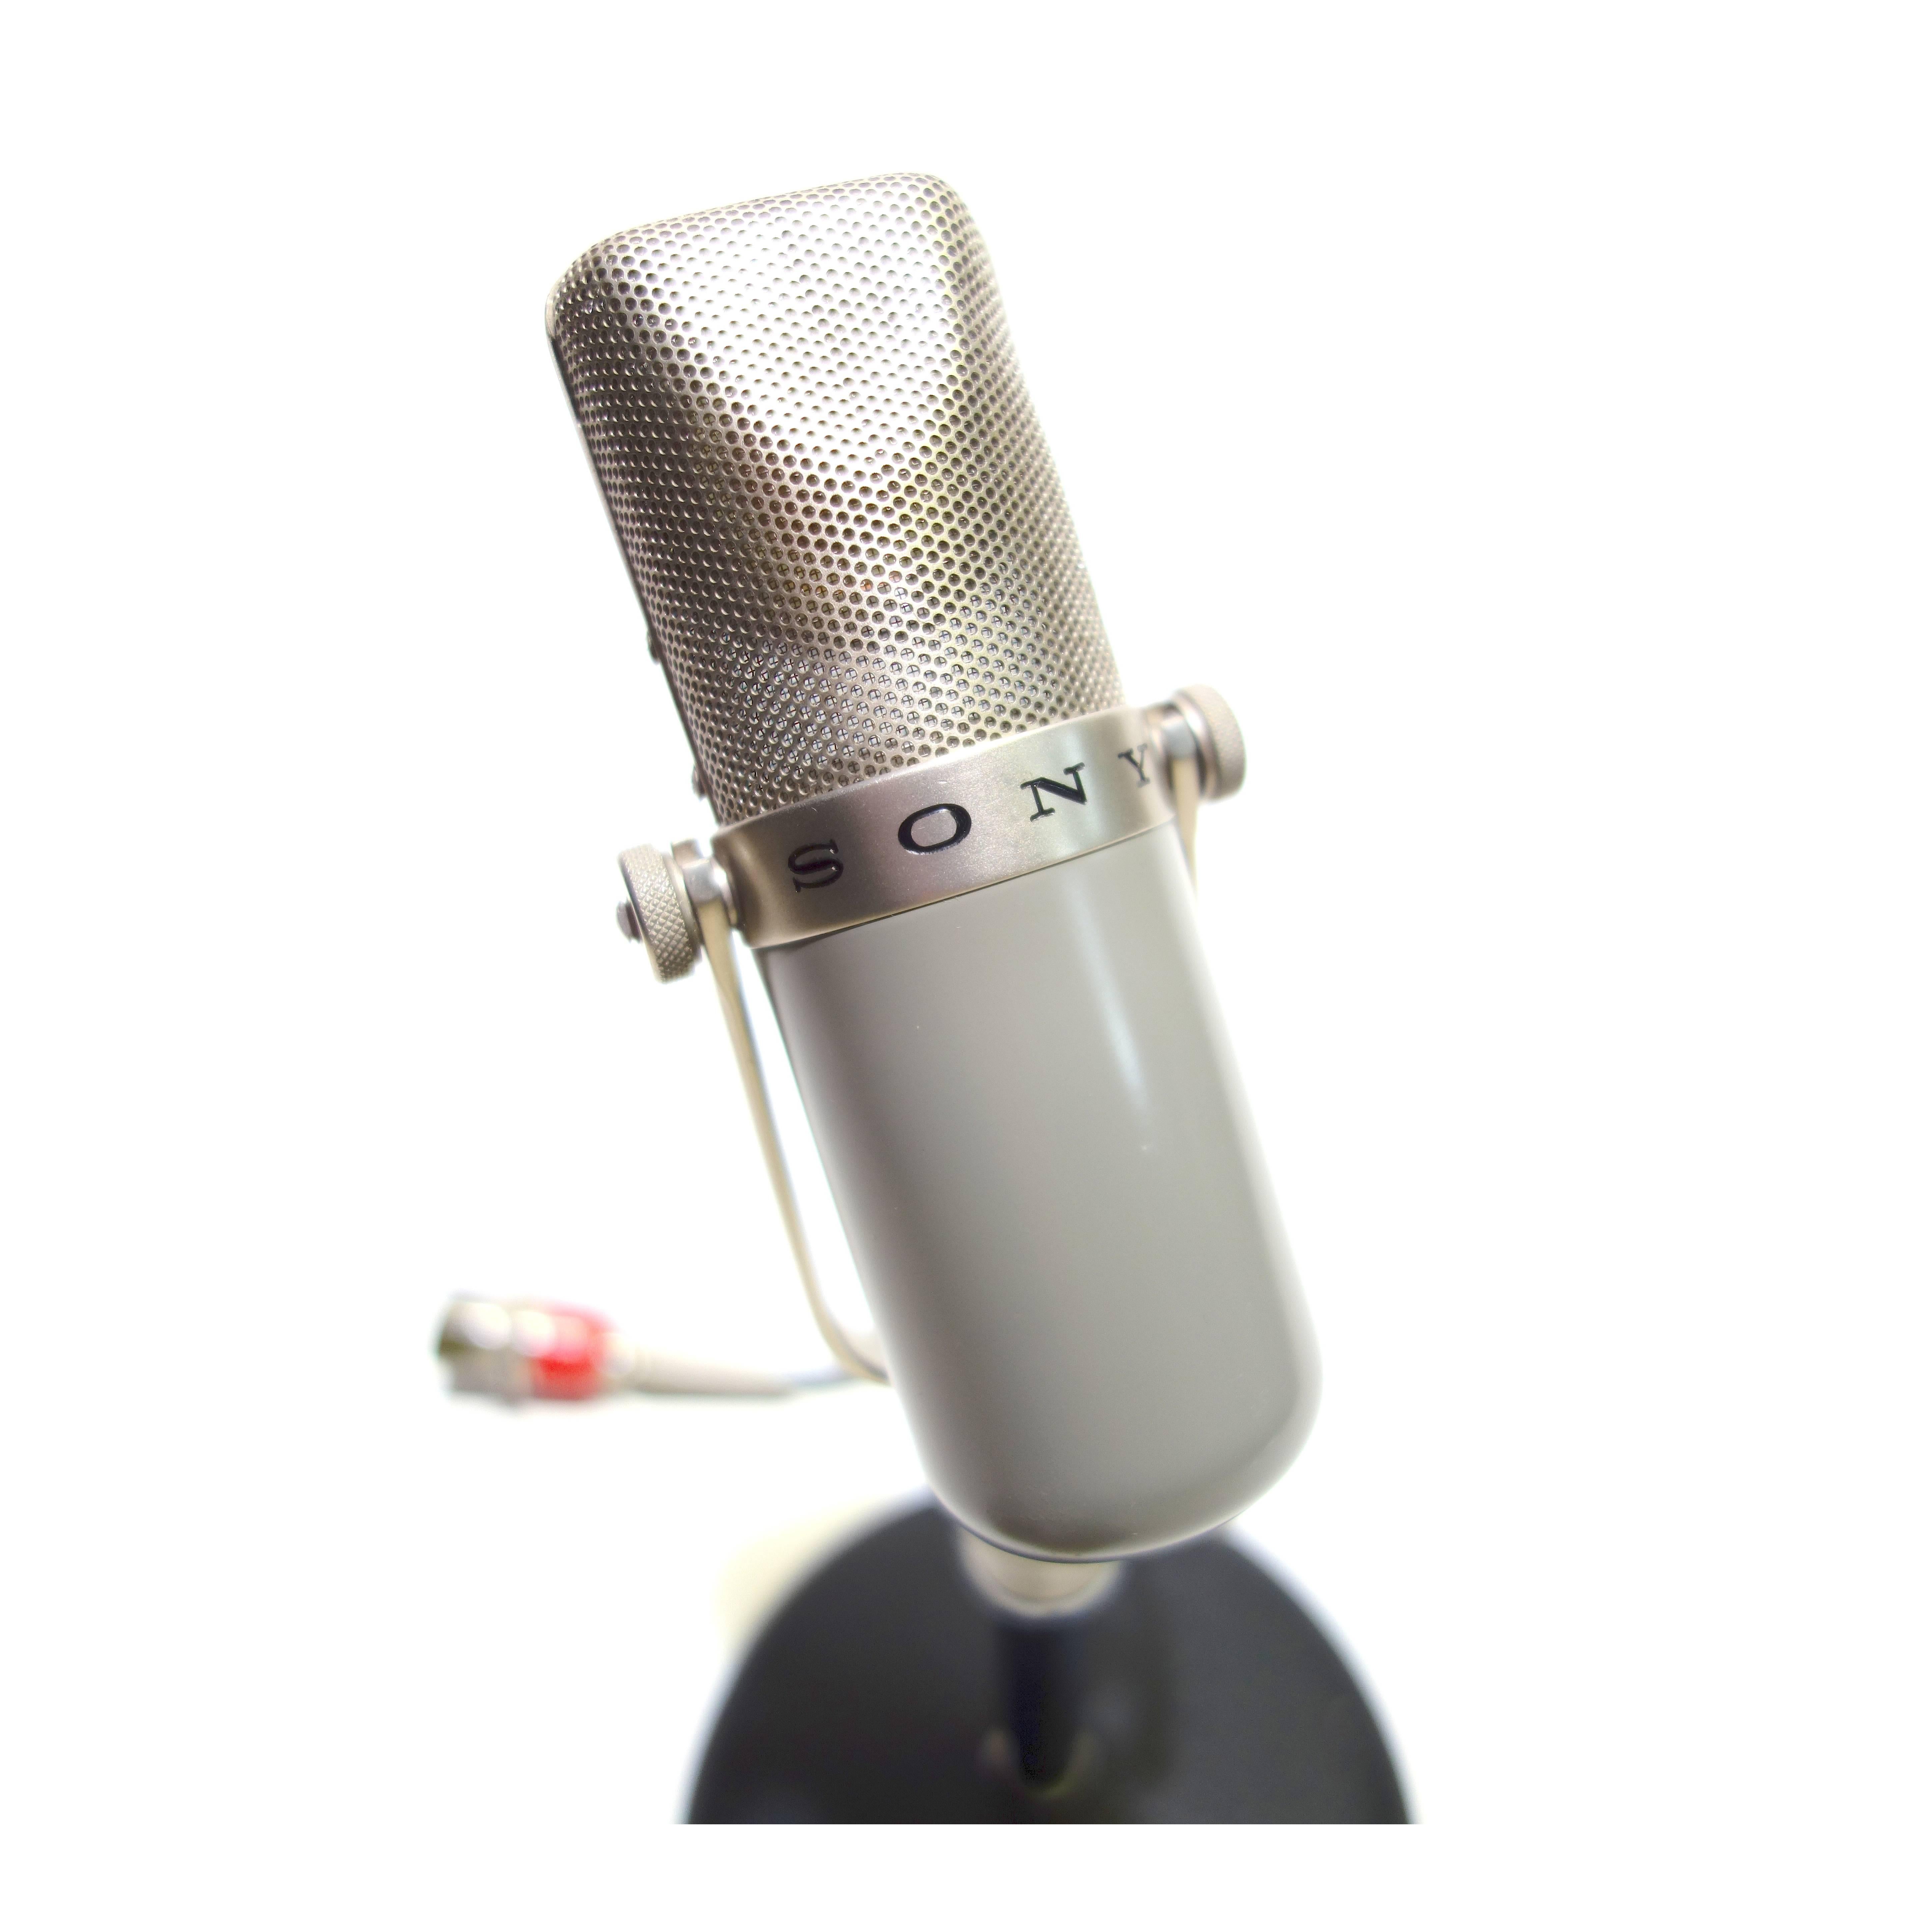 Offered for your consideration, this Sony C-37A Studio Microphone.
This iconic microphone has the Classic 1940s-1950s look and is technically complete. There is no nicer example of this rare masterpiece of audio design.

Sony Model C-37A  is a